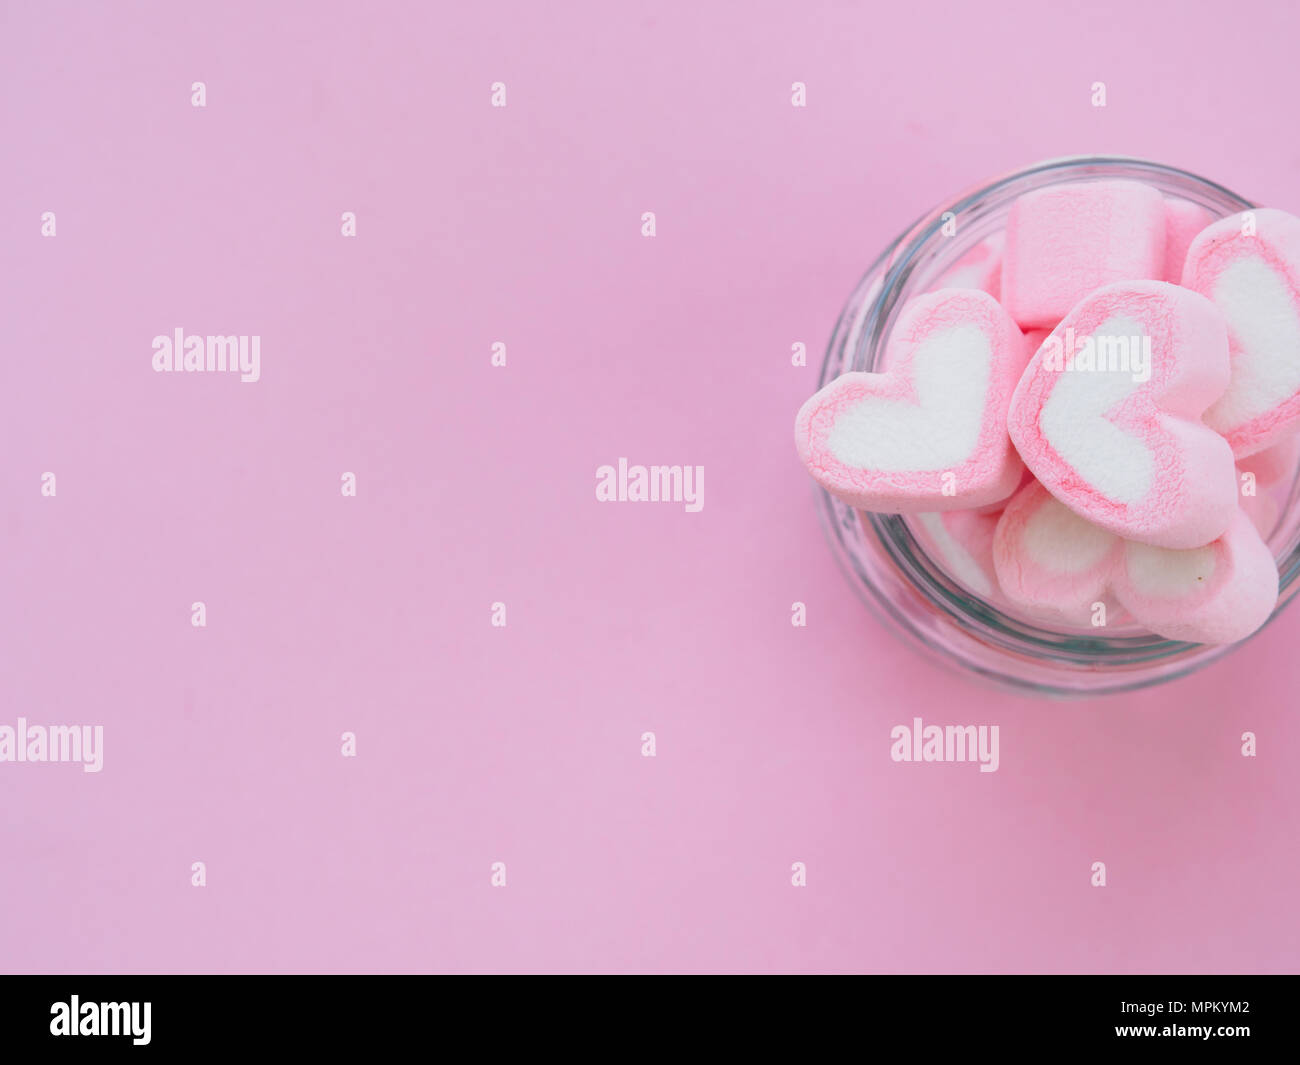 Pink fluffy heart shaped marshmallows candy background. Stock Photo by  ©galiyahassan 340052556